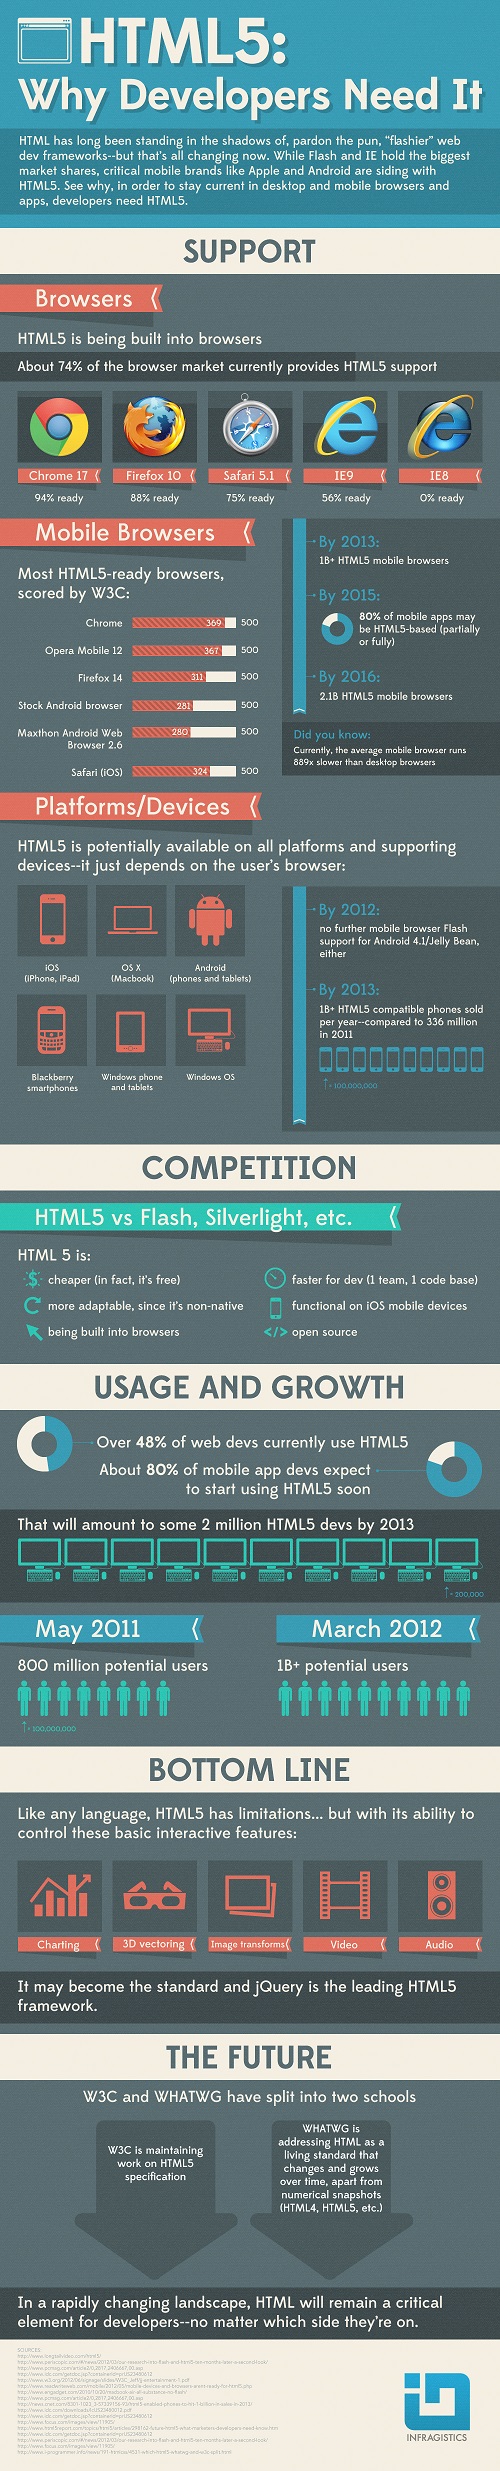 Infographic: HTML5 and Why Developers Need It